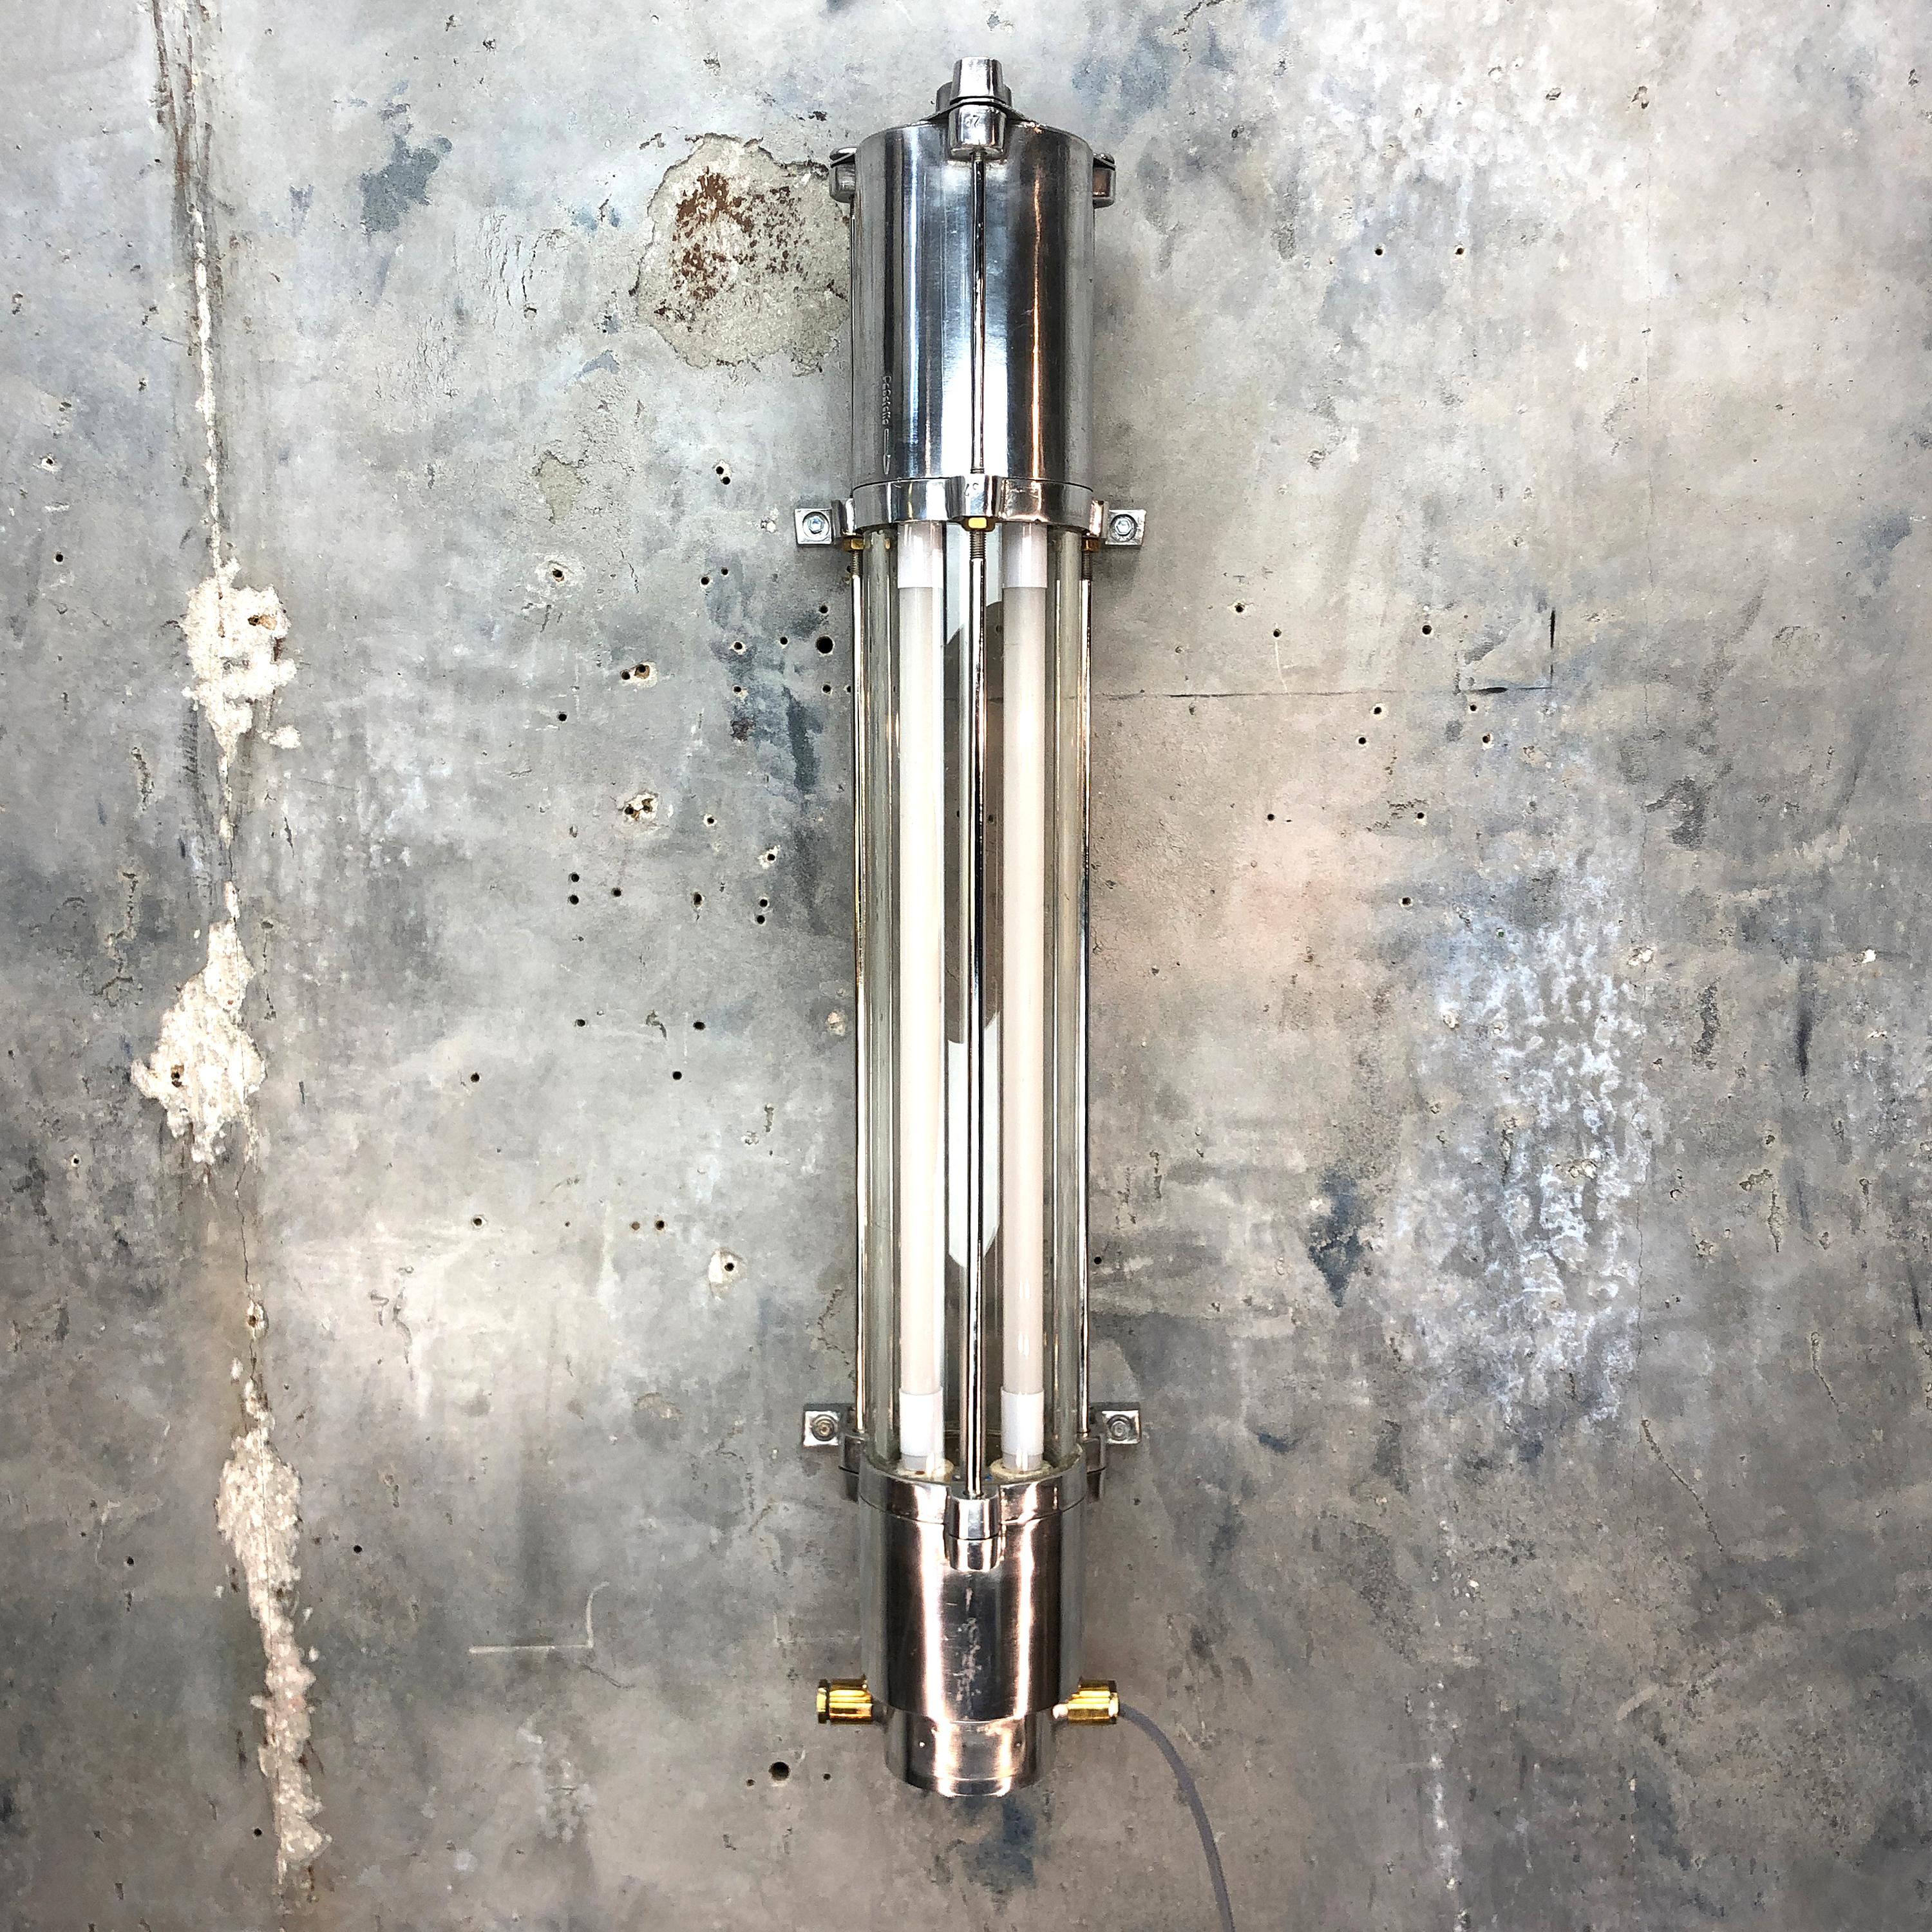 Wittenberg wall-mounted German explosion proof strip light.

Original item salvaged from supertankers and military vessels then stripped and refinished in the UK.

The original wiring is replaced with our loomlight wiring system which exceeds